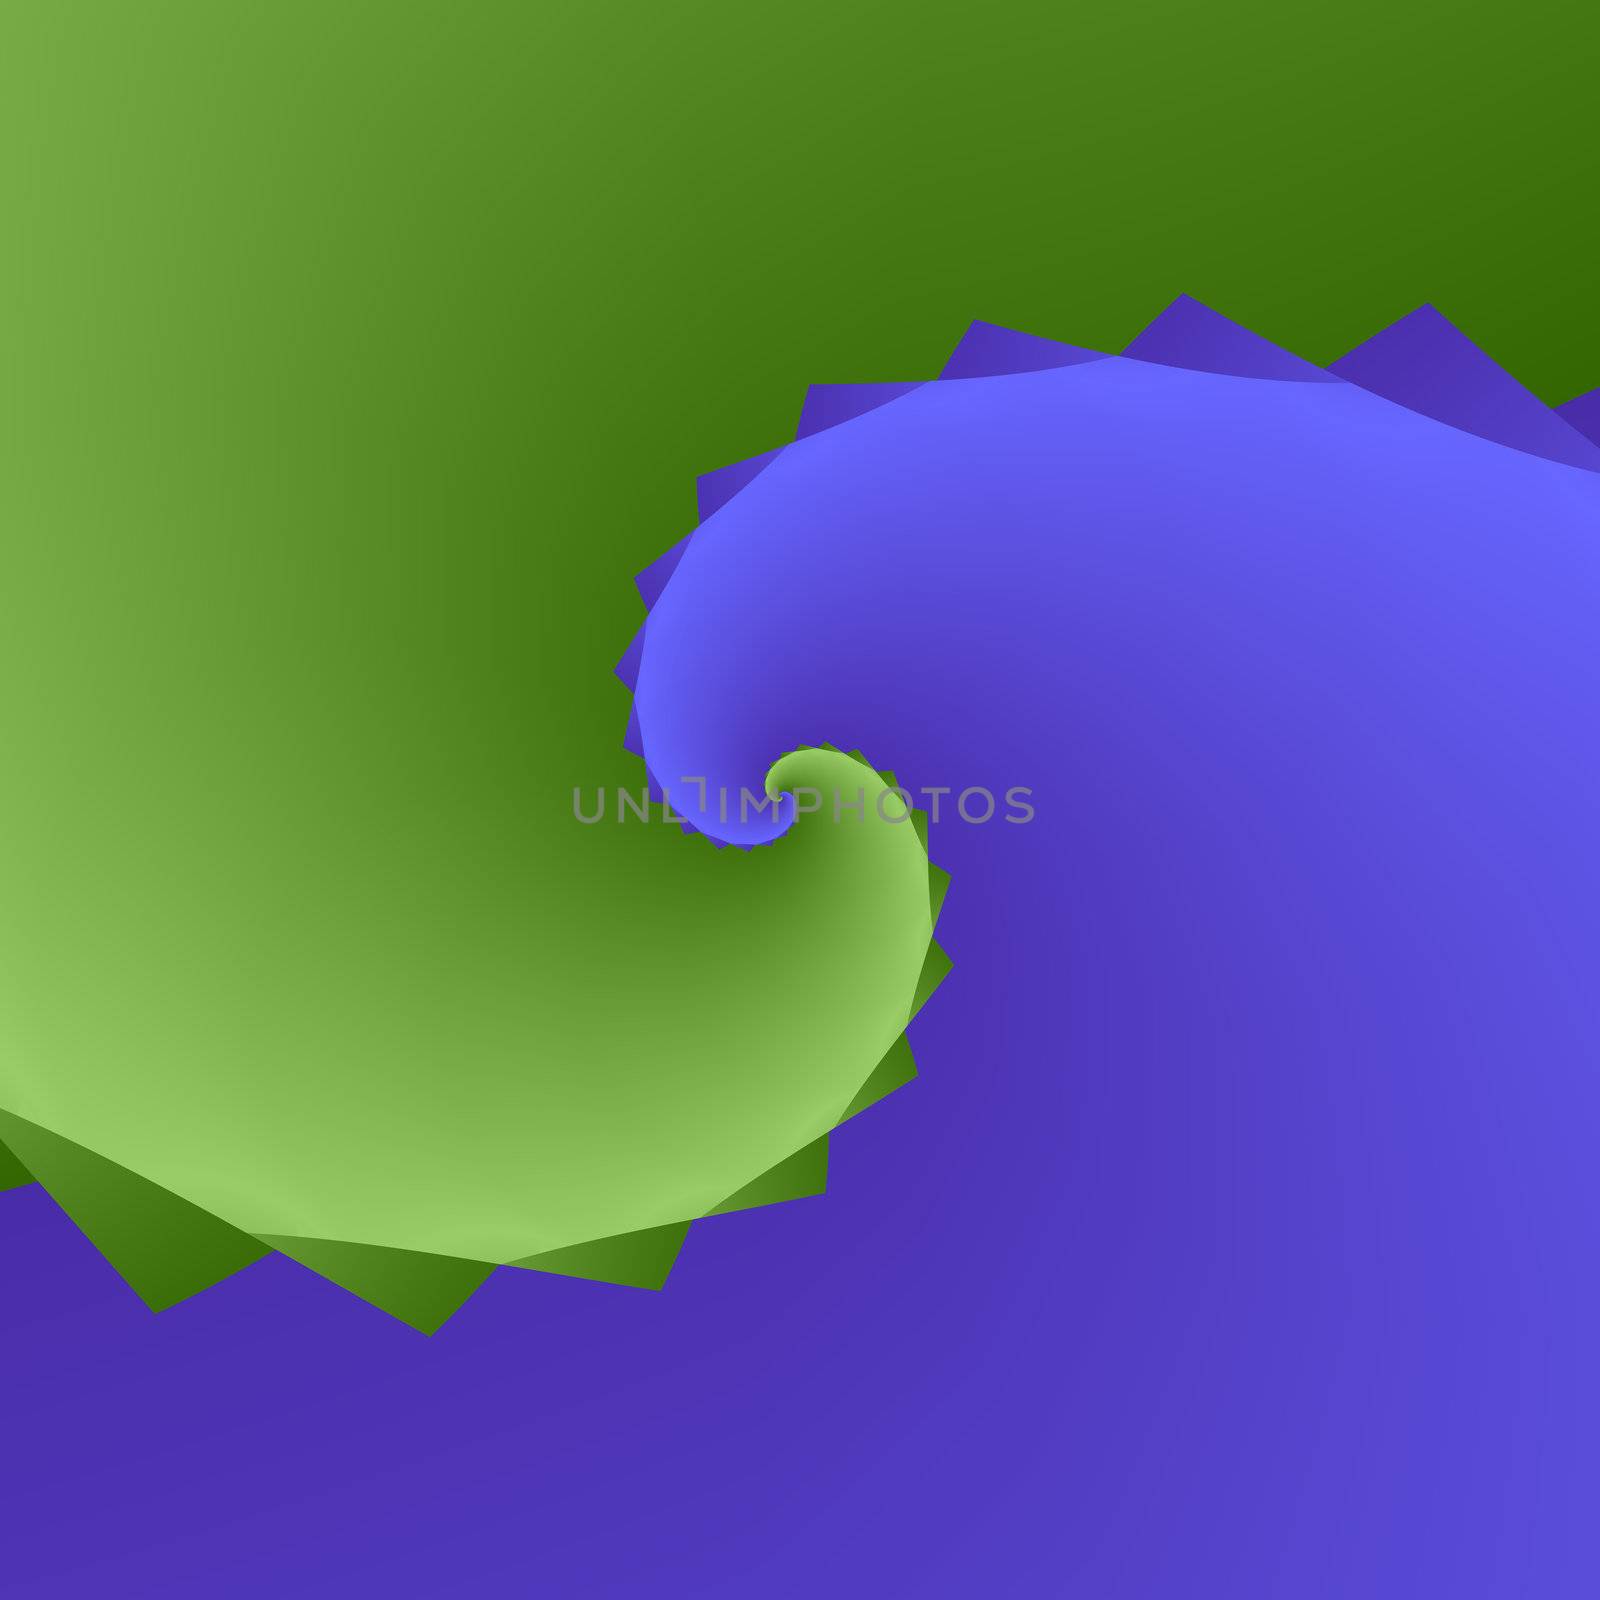 An abstract fractal with summetrical interlocking blue and green curls.  